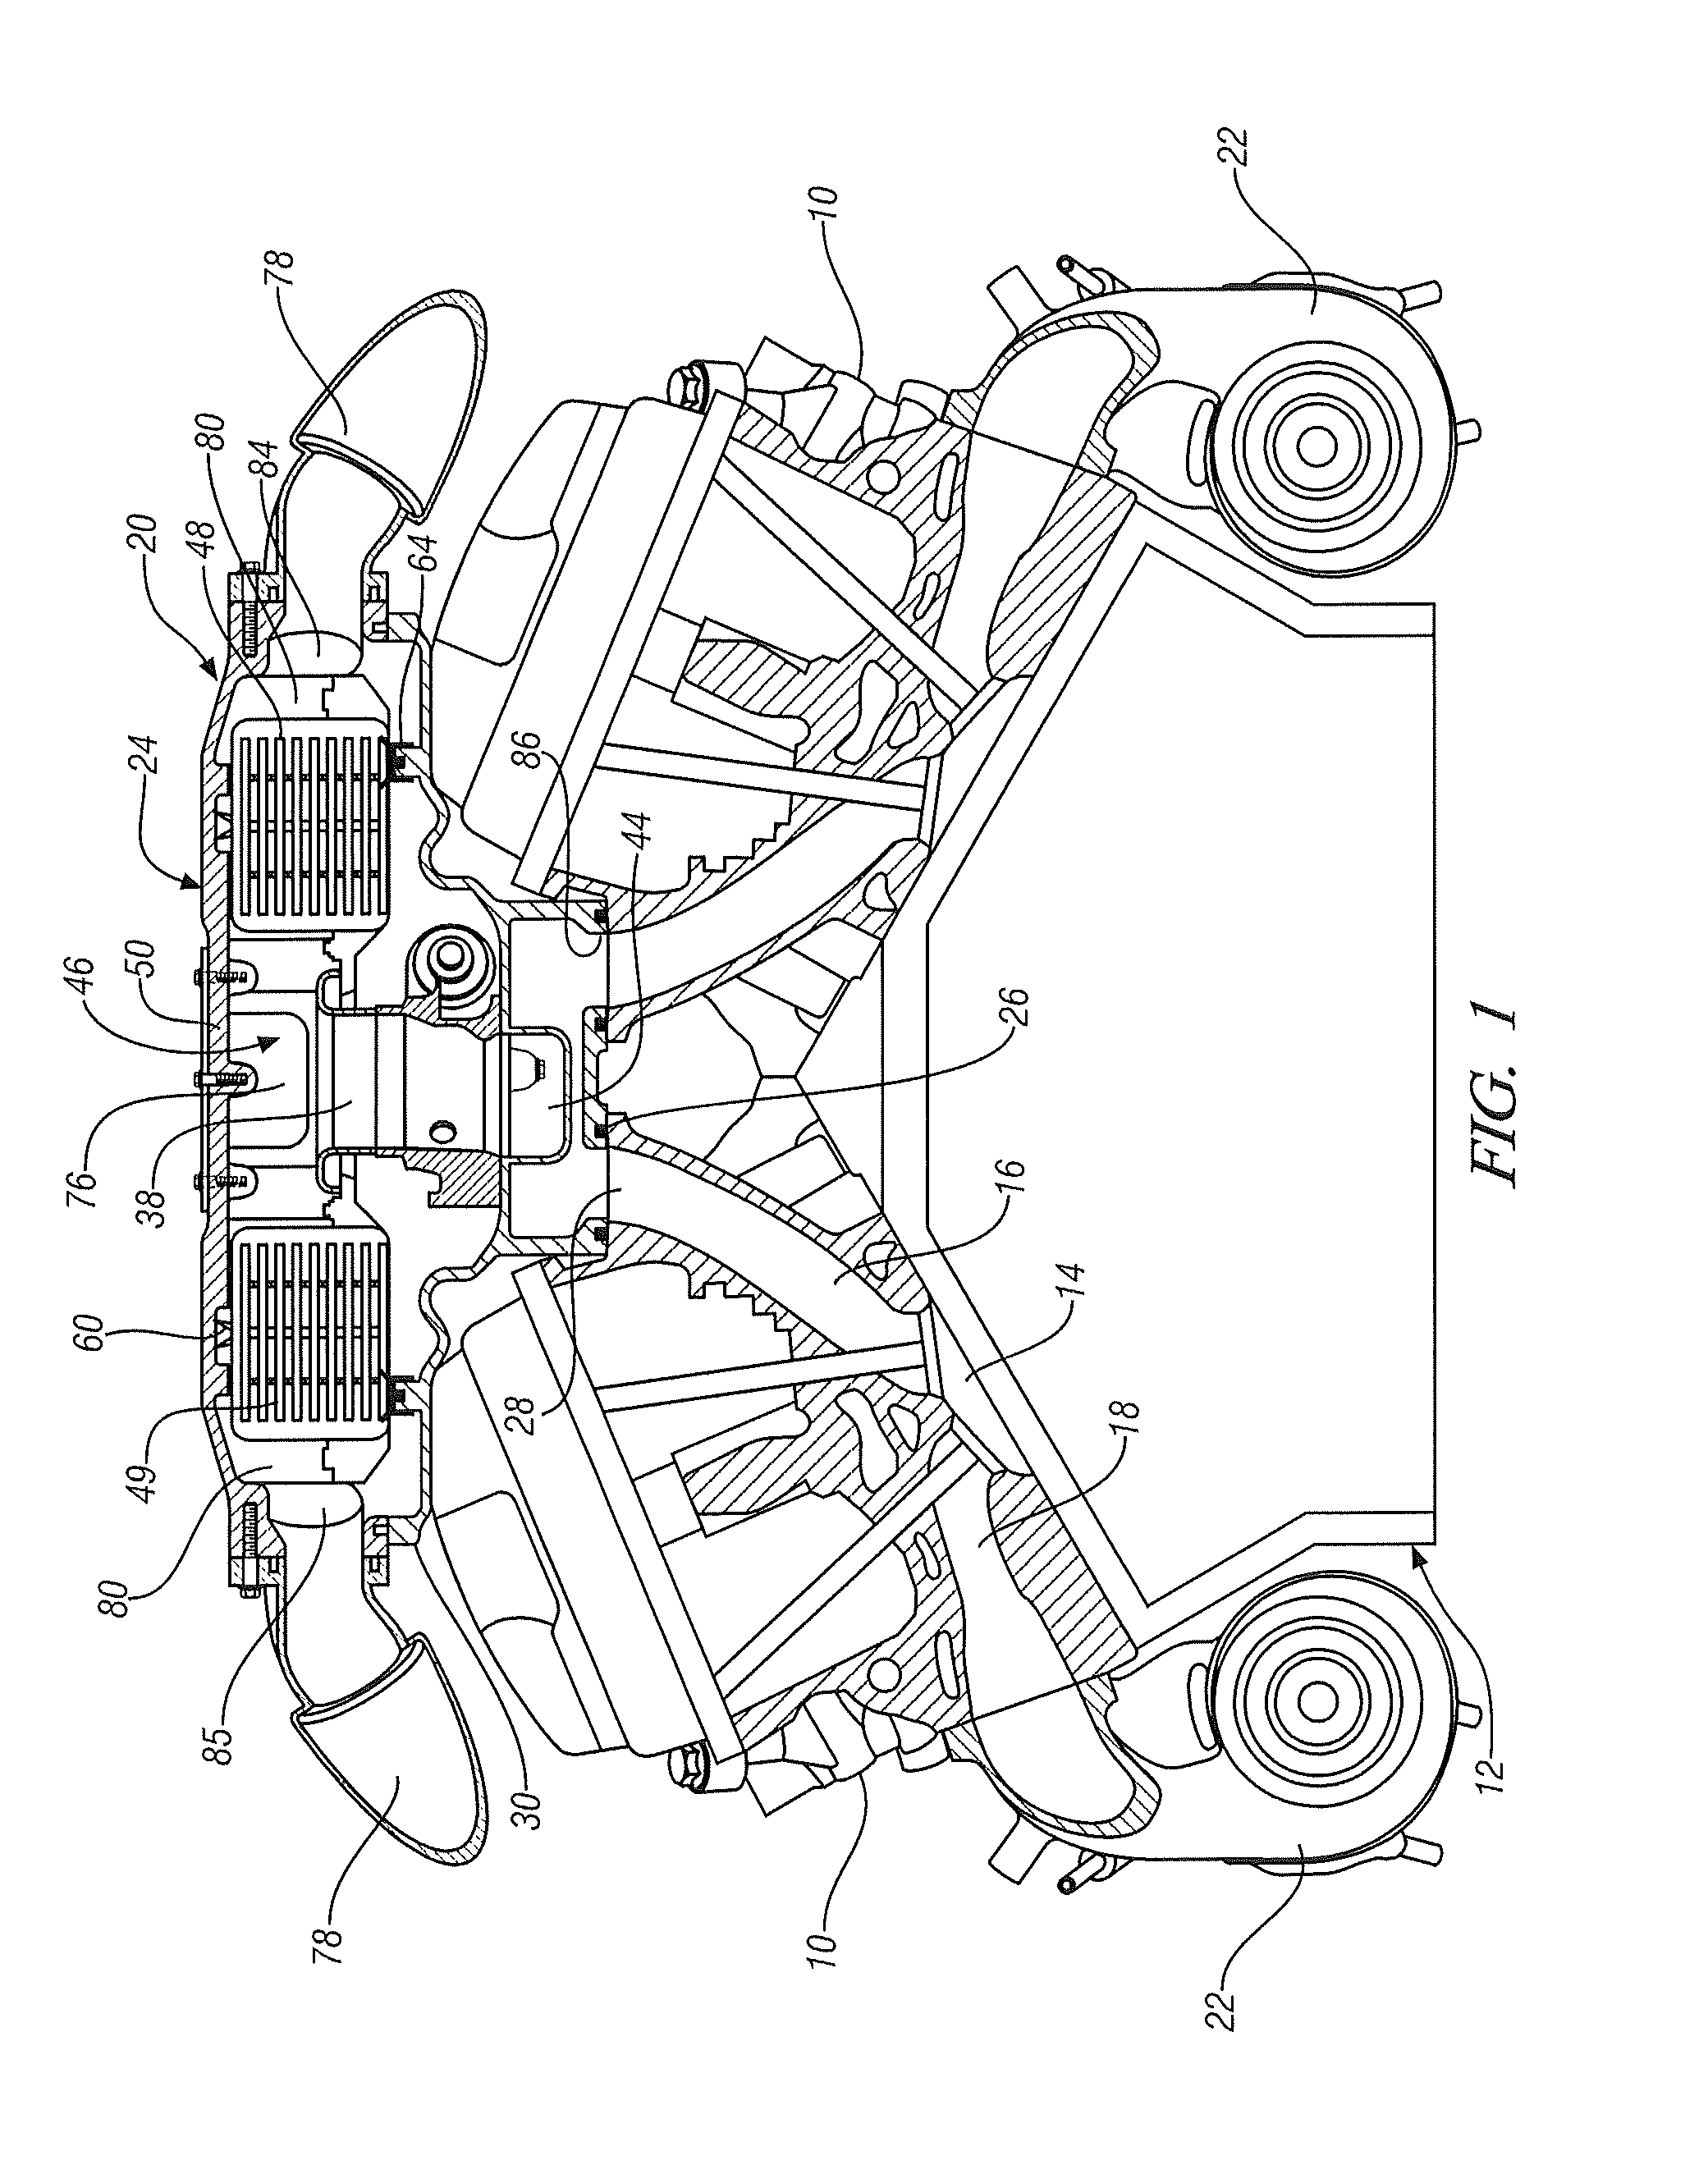 Intake System for an Internal Combustion Engine